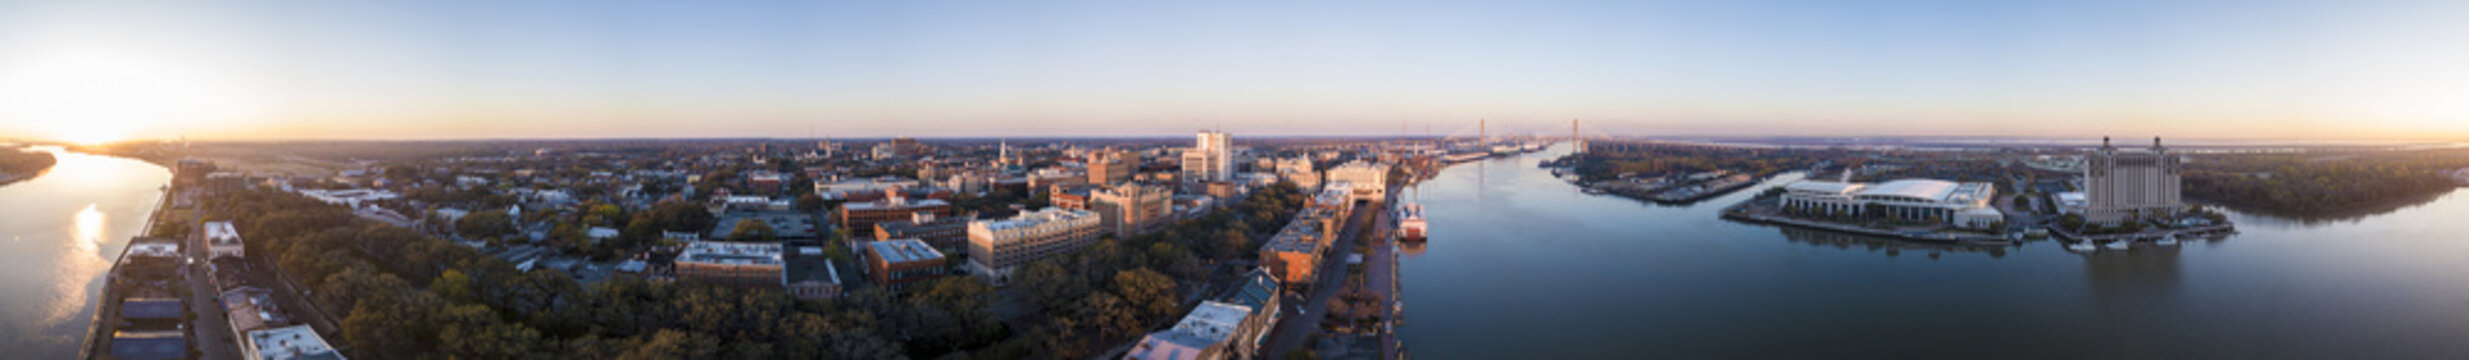 360 degree panorama of the downtown area of Savannah, Georgia and River Street.